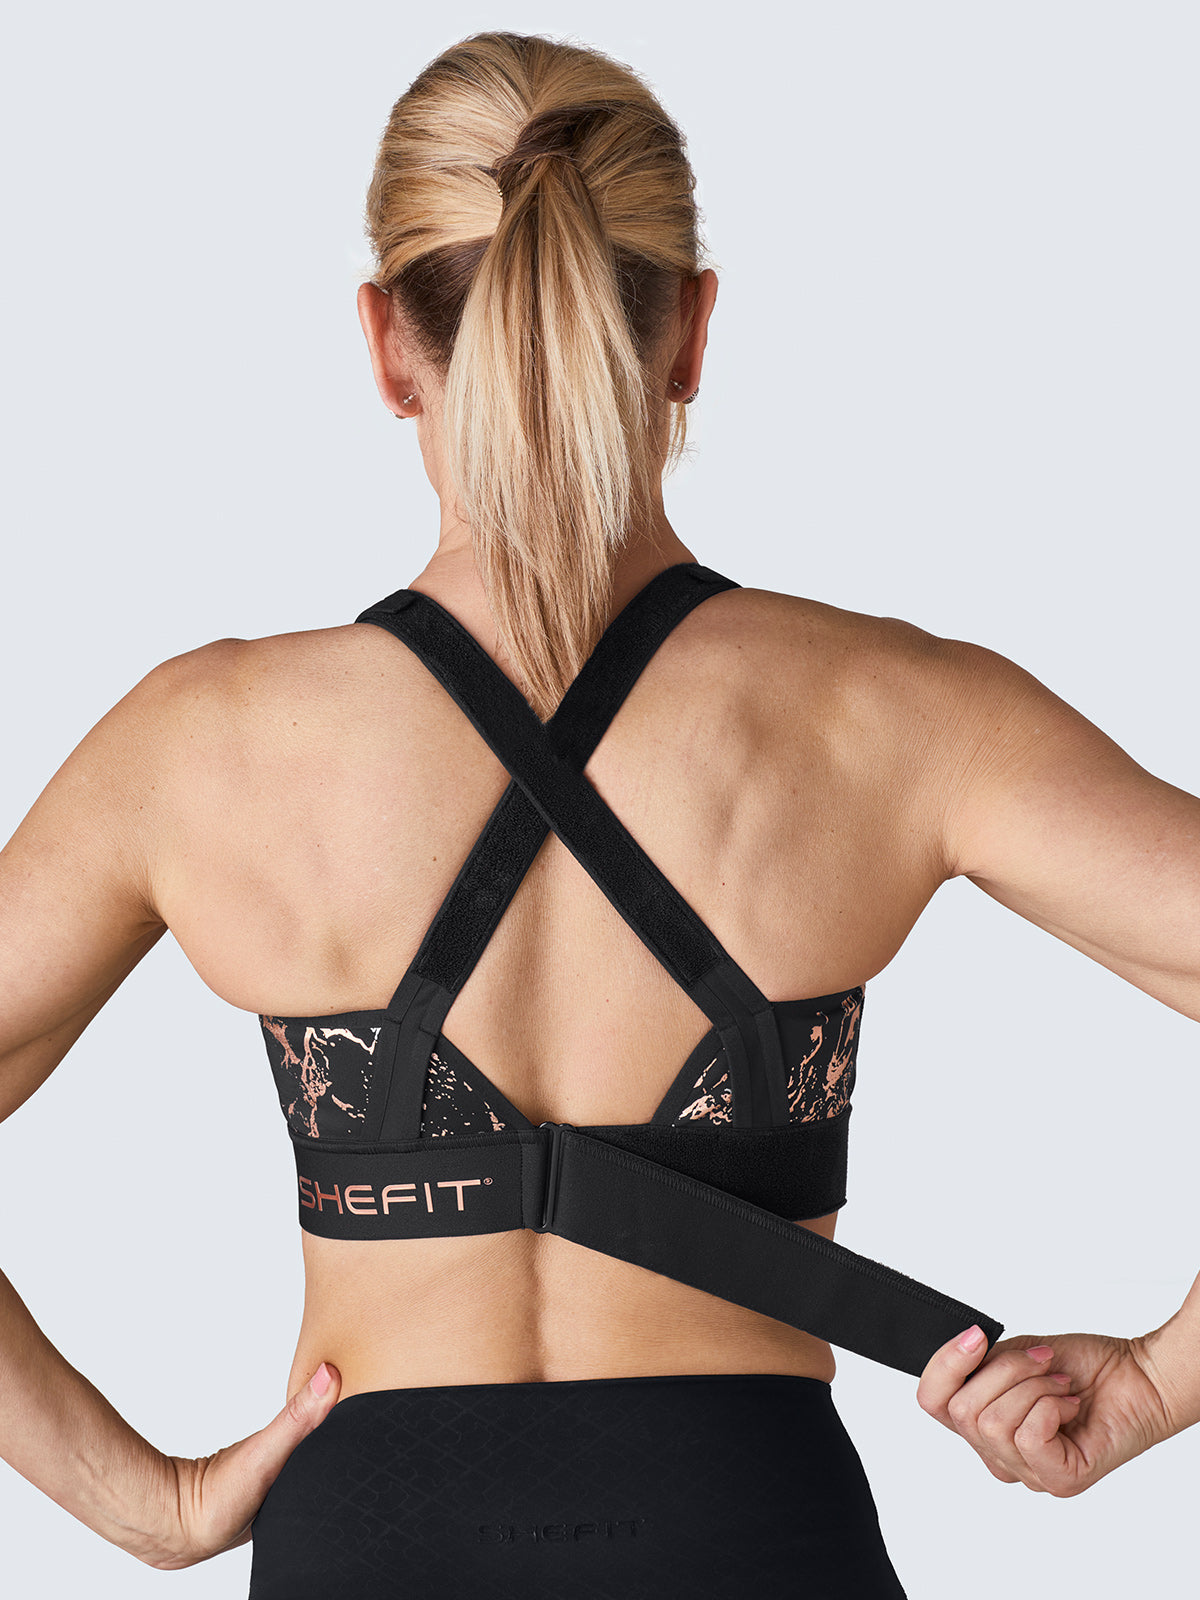 SHEFIT 3 Luxe Black High Impact Ultimate Sports Bra Fully Adjustable Straps  3X